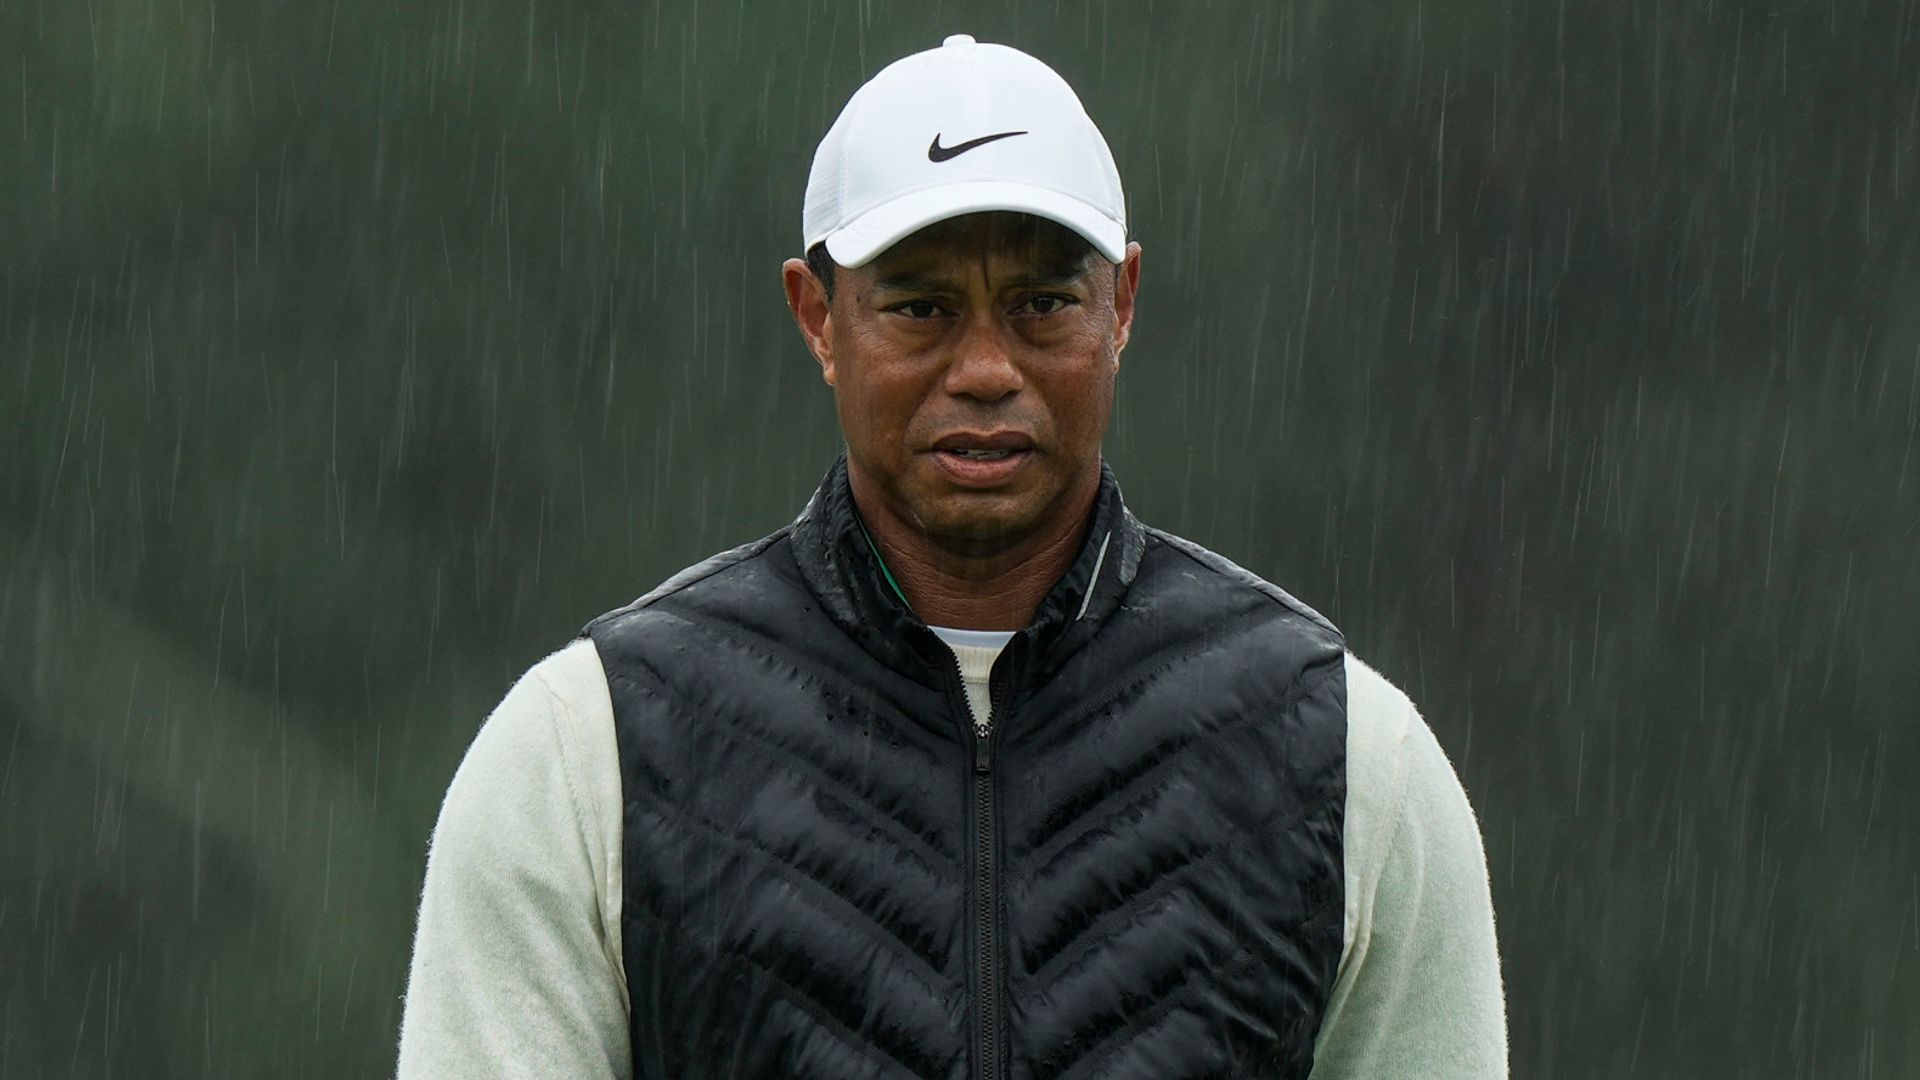 Woods to miss The Open due to injury